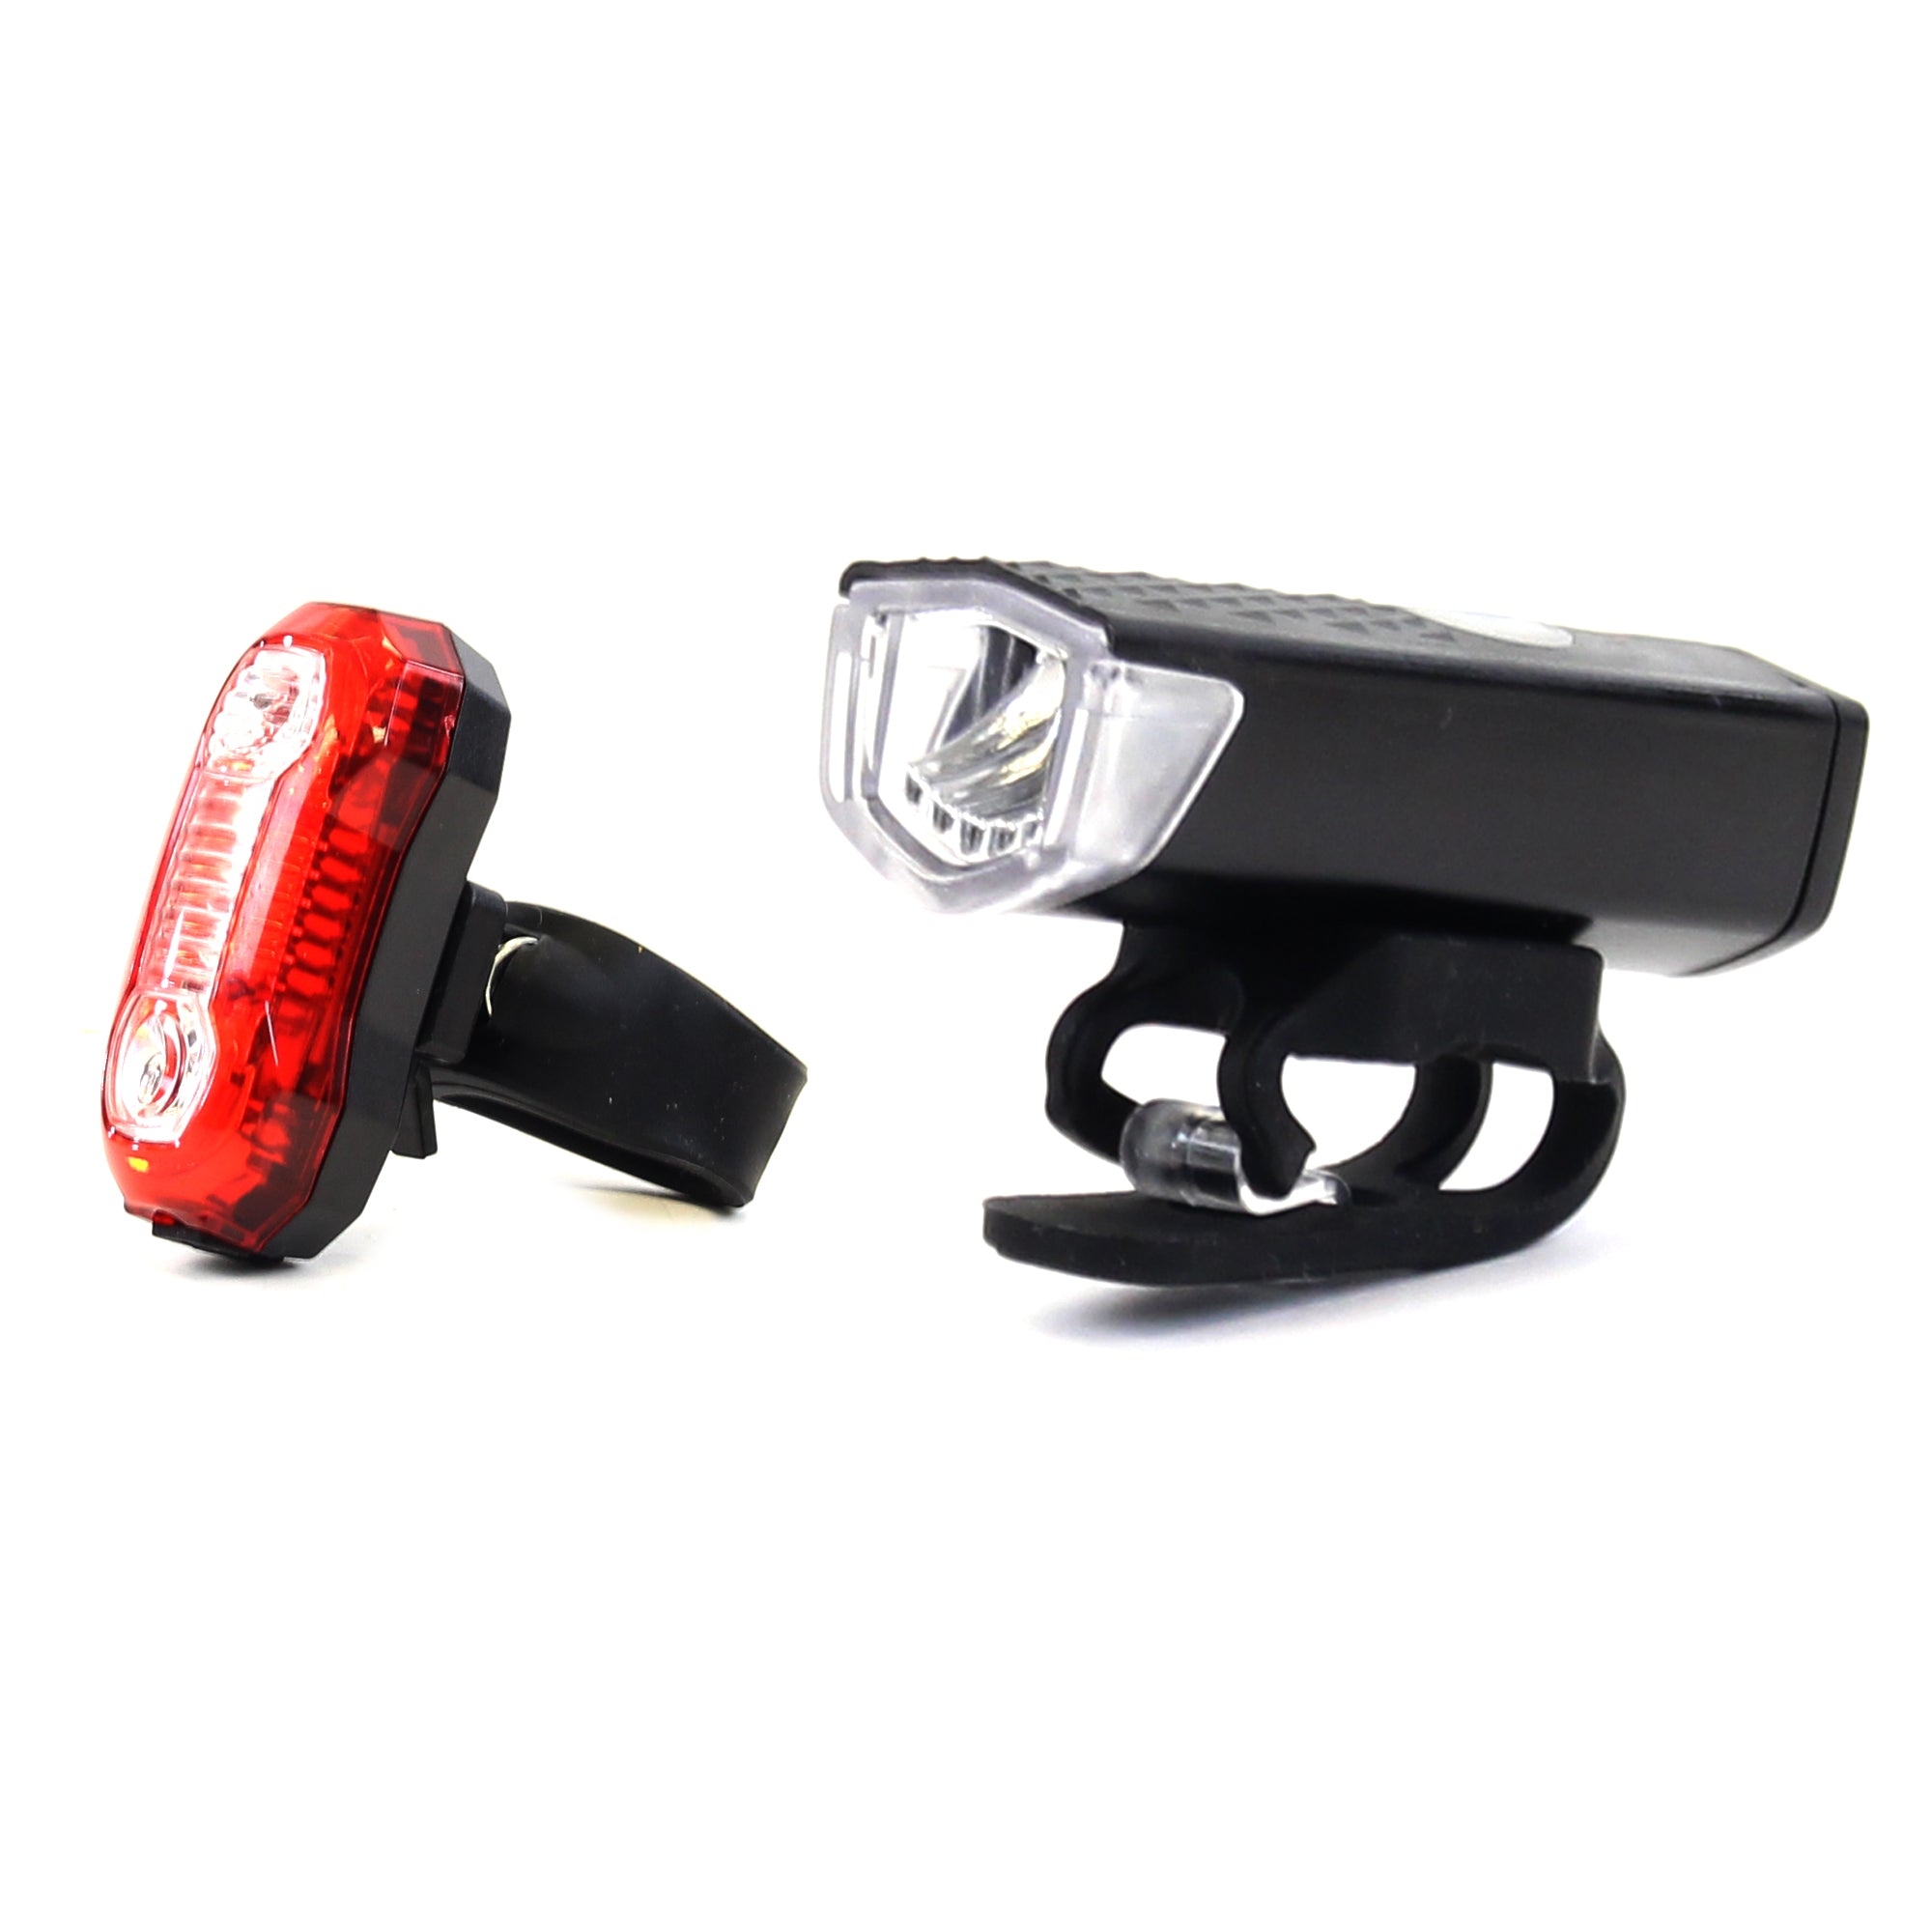 Lights - Beam USB Rechargeable